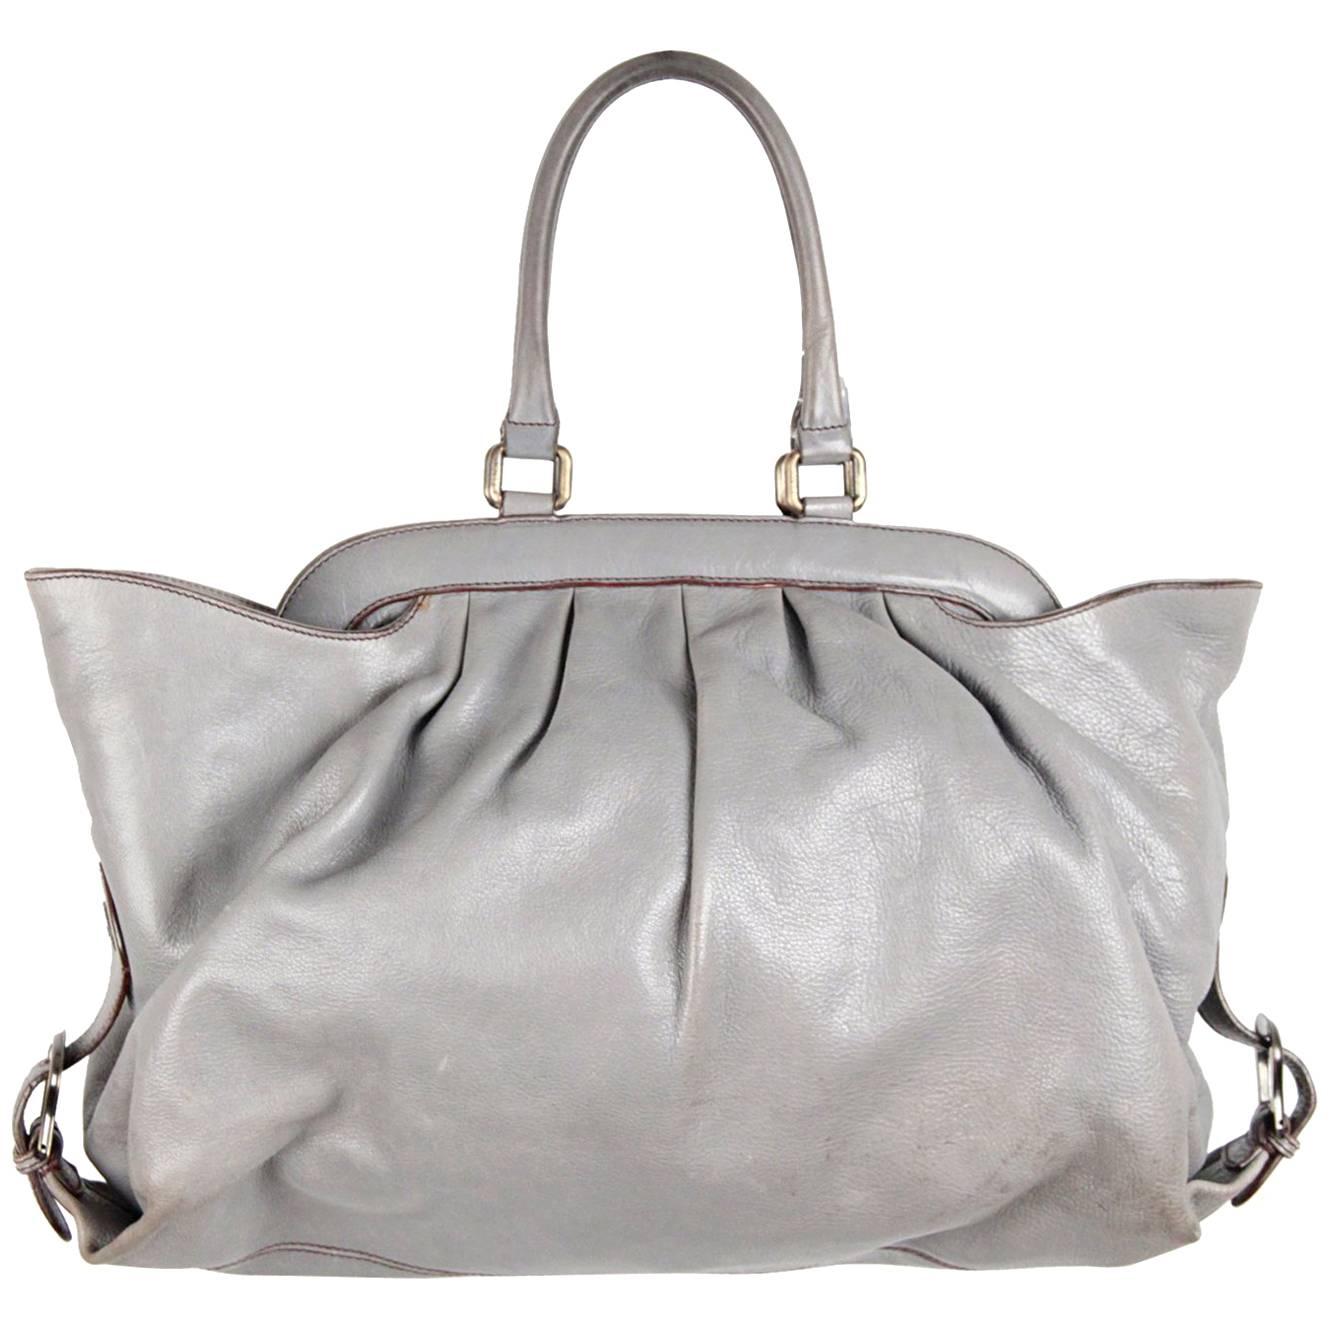 FENDI Gray Leather DOCTOR TOTE BAG